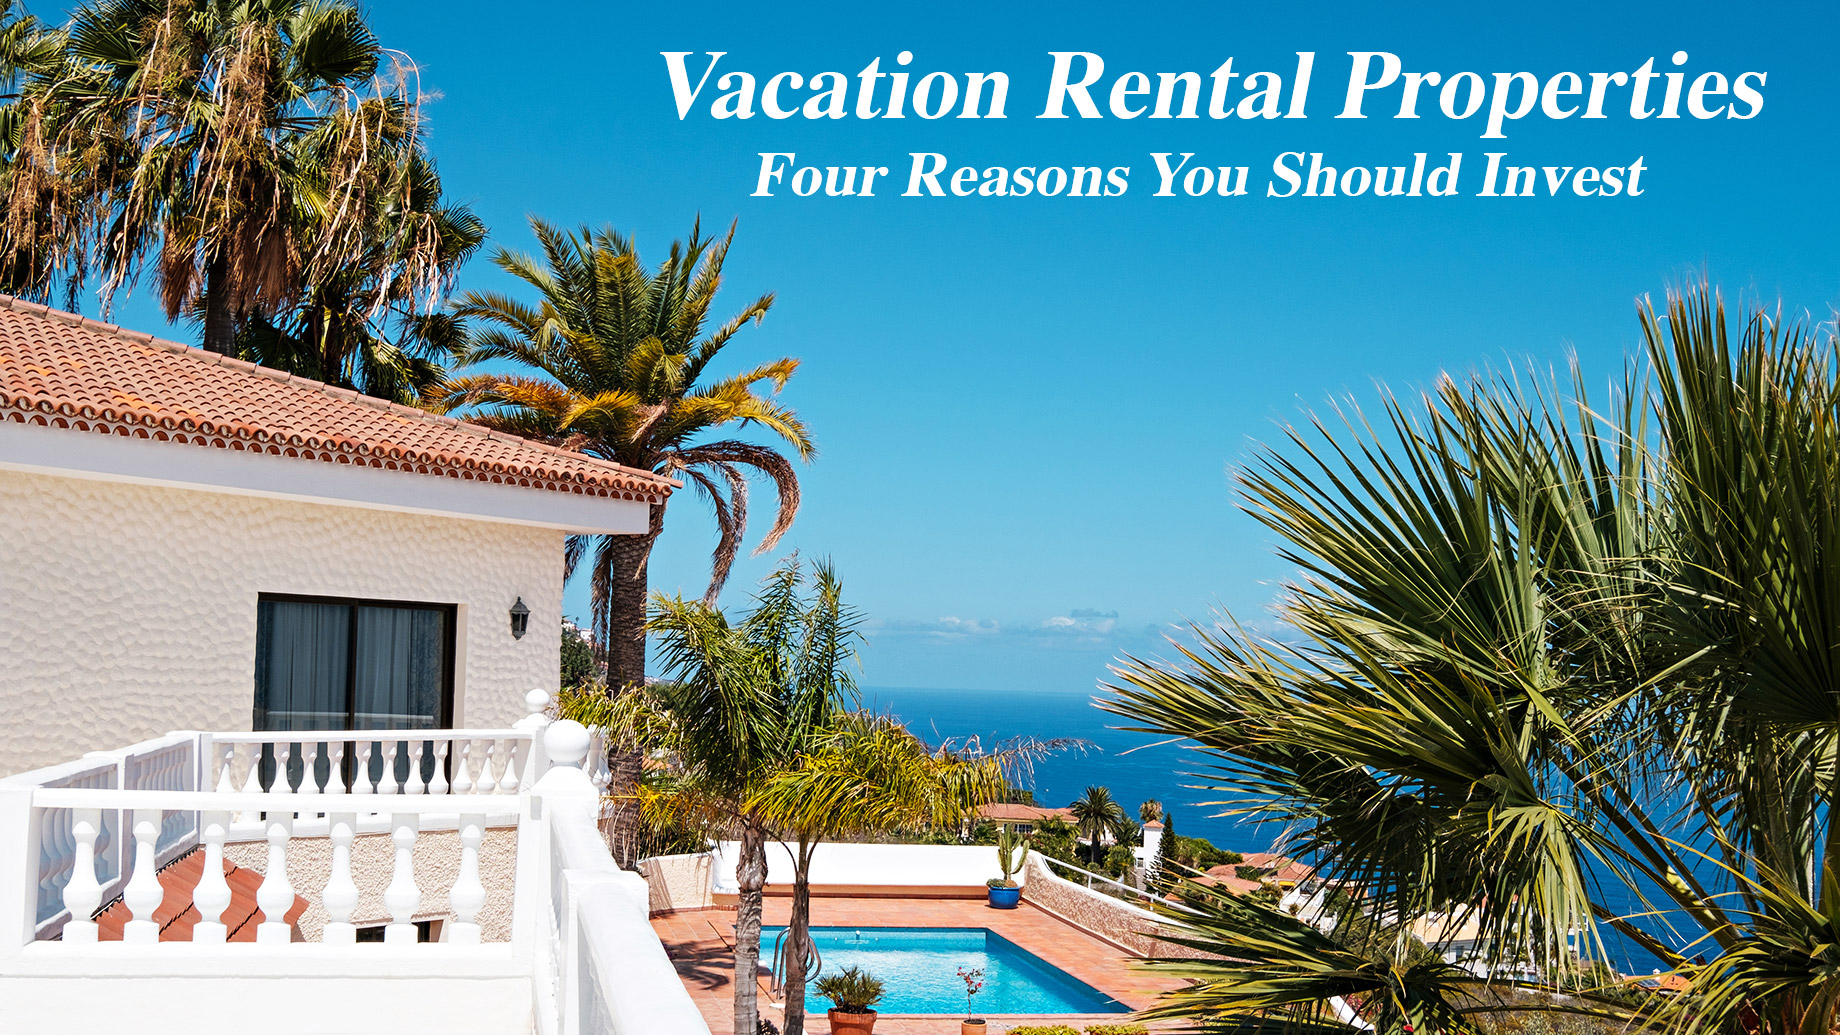 Vacation Rental Properties - Four Reasons You Should Invest